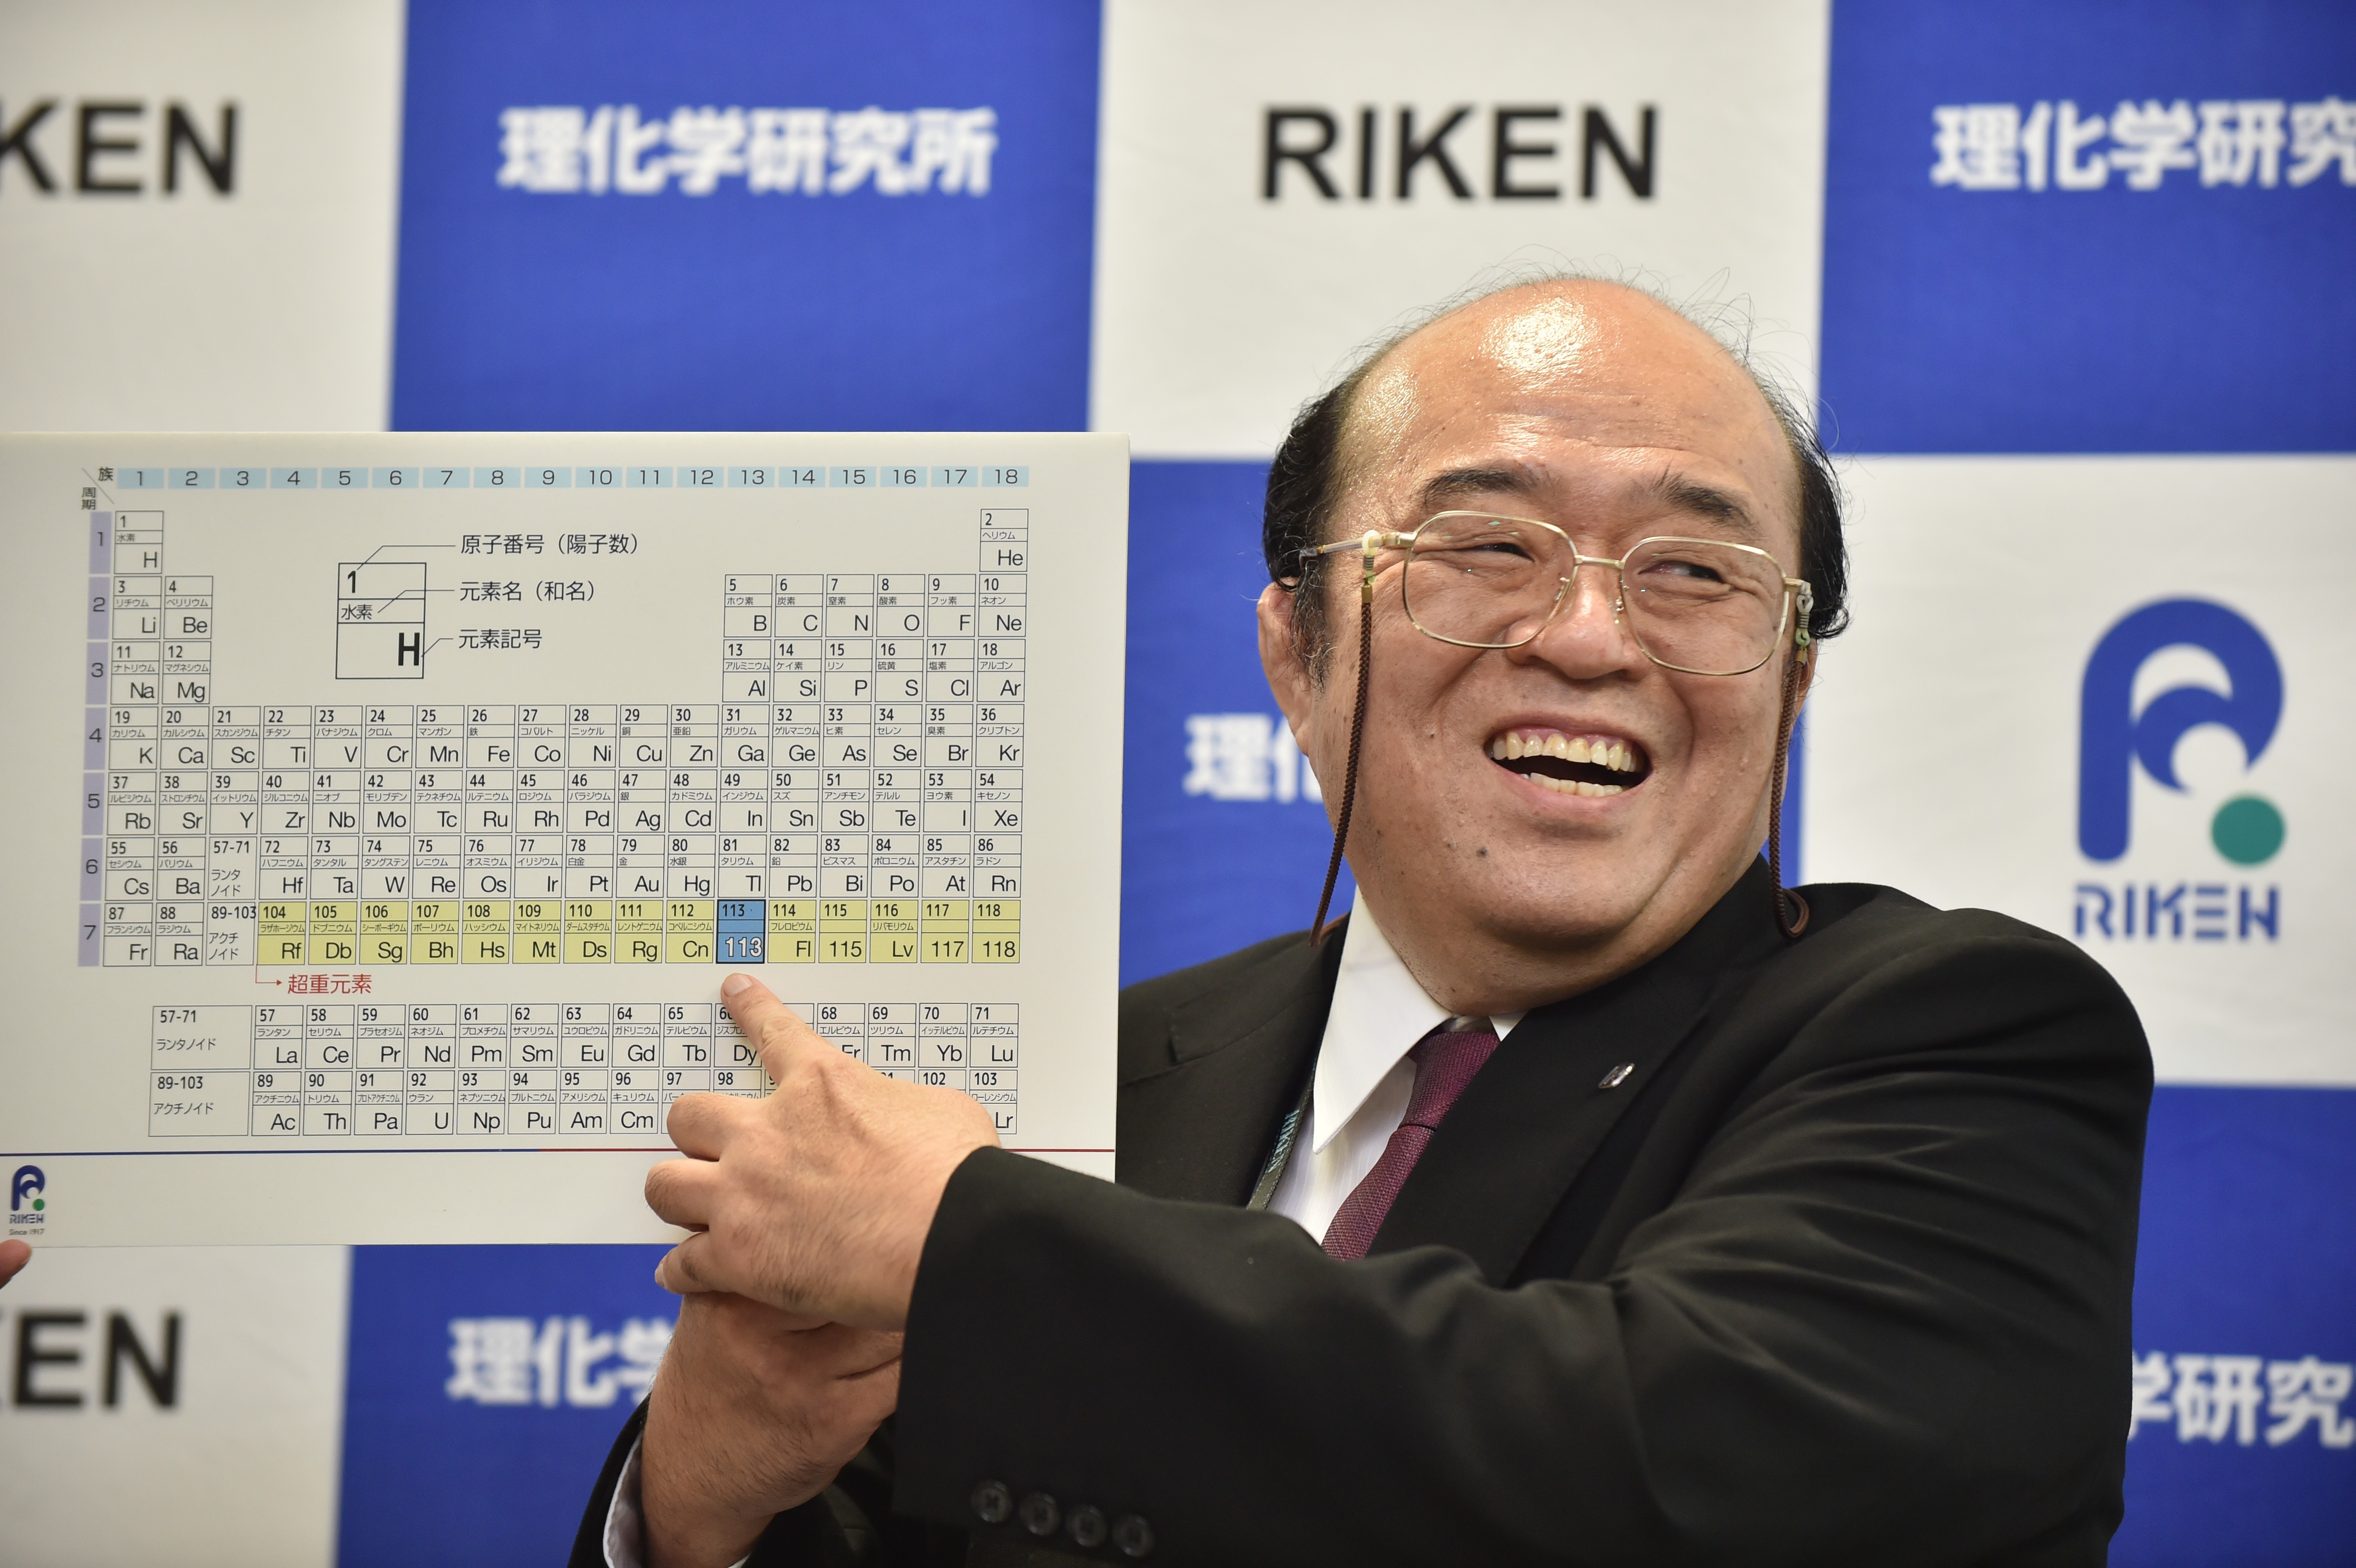 Kosuke Morita, the leader of the Riken team, smiles as he points to a board displaying the new atomic element 113 during a press conference in Wako, Saitama prefecture on December 31, 2015. A Japanese research team has received naming rights for new atomic element 113, the first on the periodic chart to be named by Asian scientists, the team's institute said December 31. Japan's Riken Institute said a team led by Kosuke Morita was awarded the rights from global scientific bodies -- the International Union of Pure and Applied Chemistry (IUPAC) and the International Union of Pure and Applied Physics (IUPAP) -- after successfully creating the new synthetic element three times from 2004 to 2012. AFP PHOTO / KAZUHIRO NOGI / AFP PHOTO / KAZUHIRO NOGI